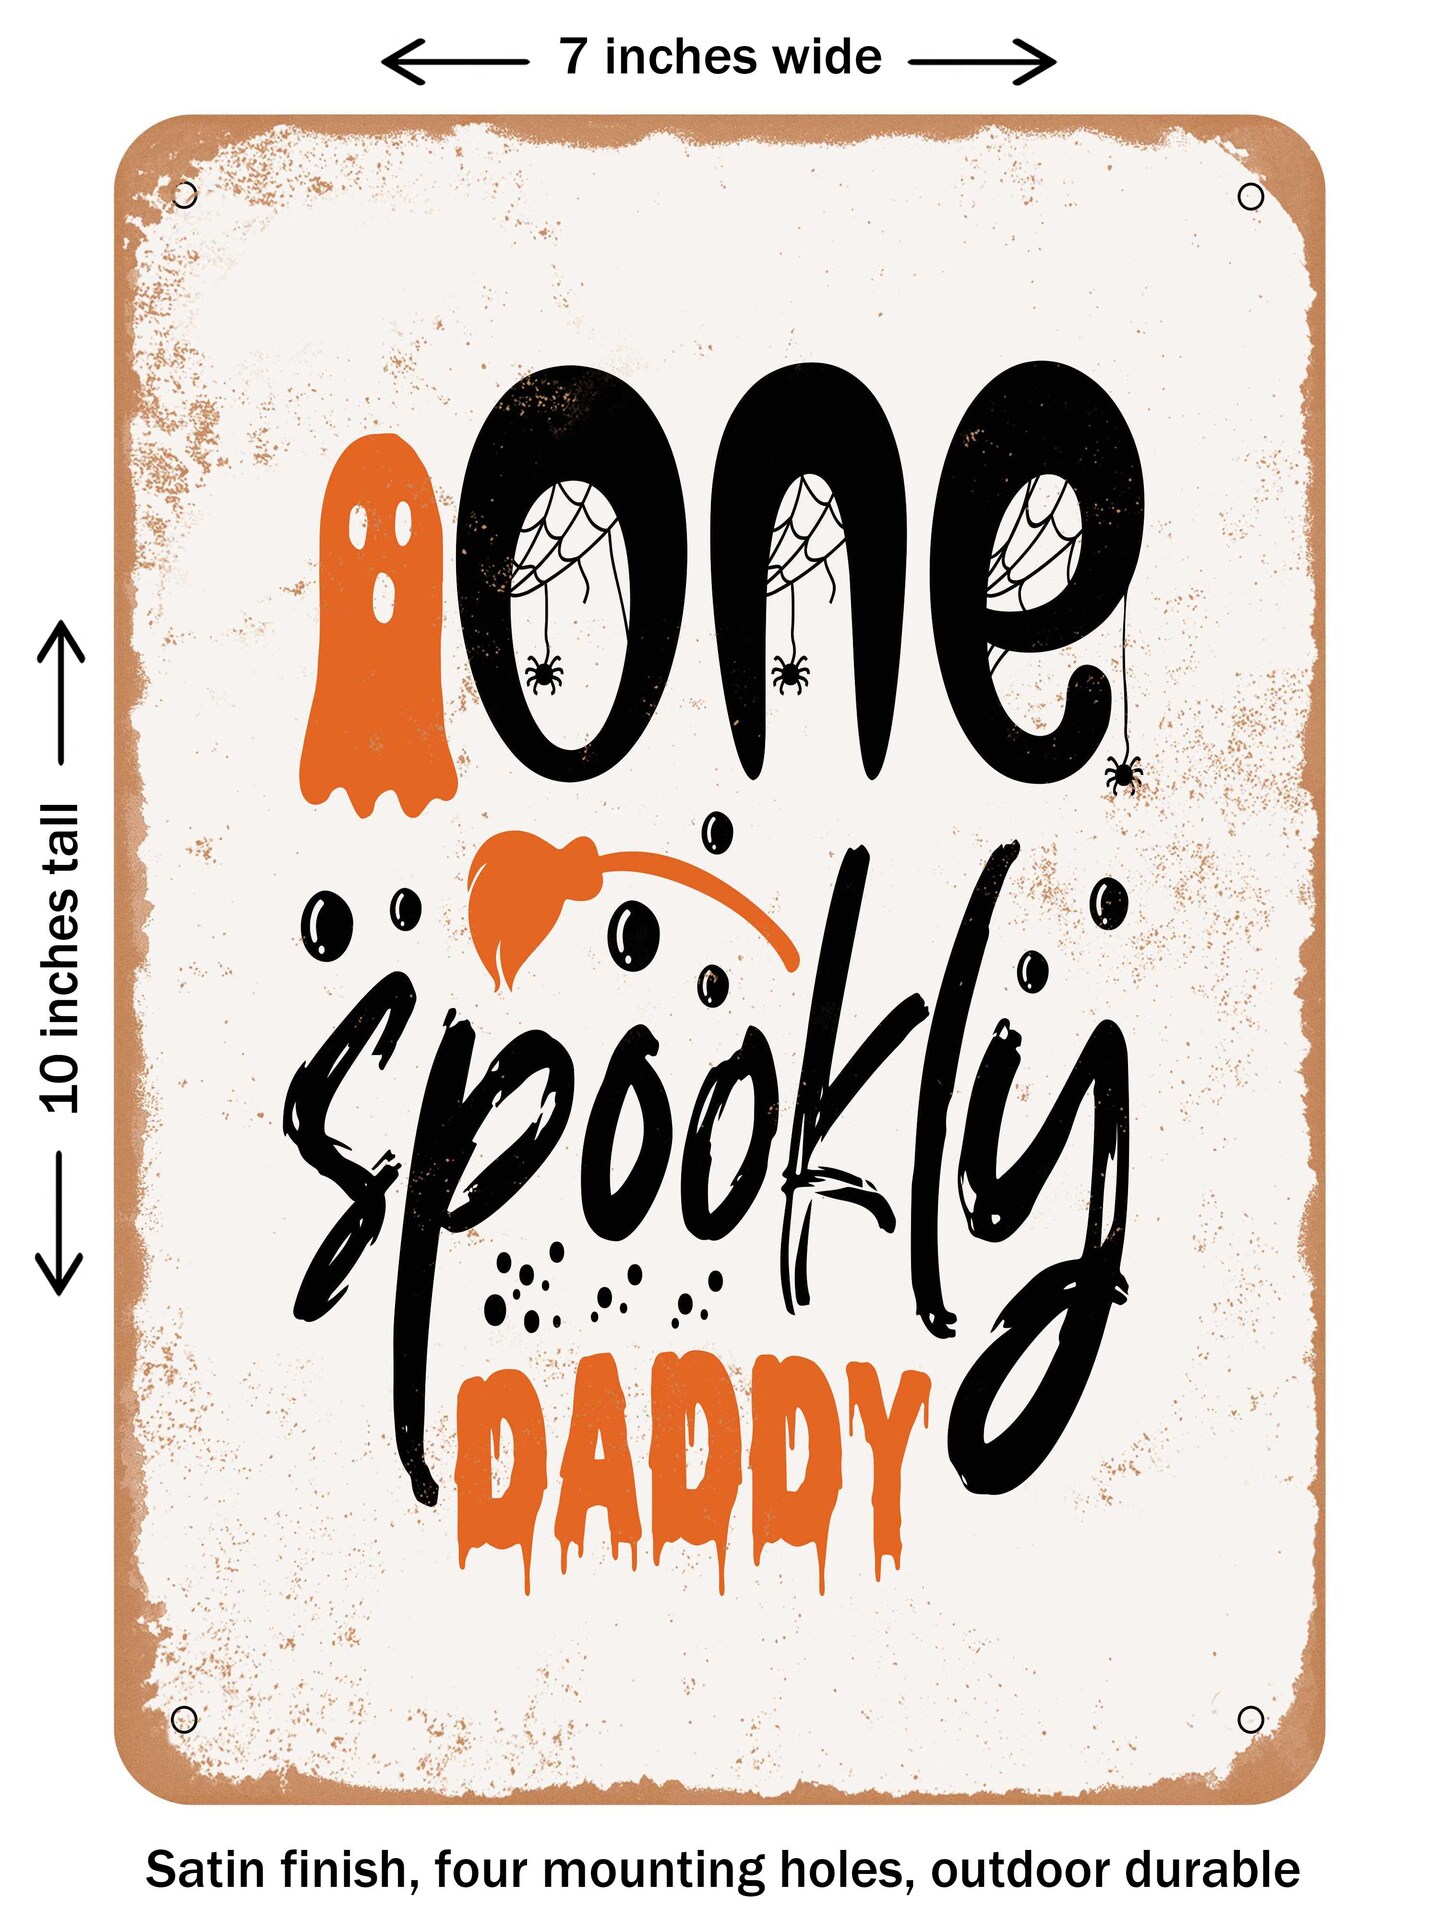 DECORATIVE METAL SIGN - One Spookly Daddy  - Vintage Rusty Look